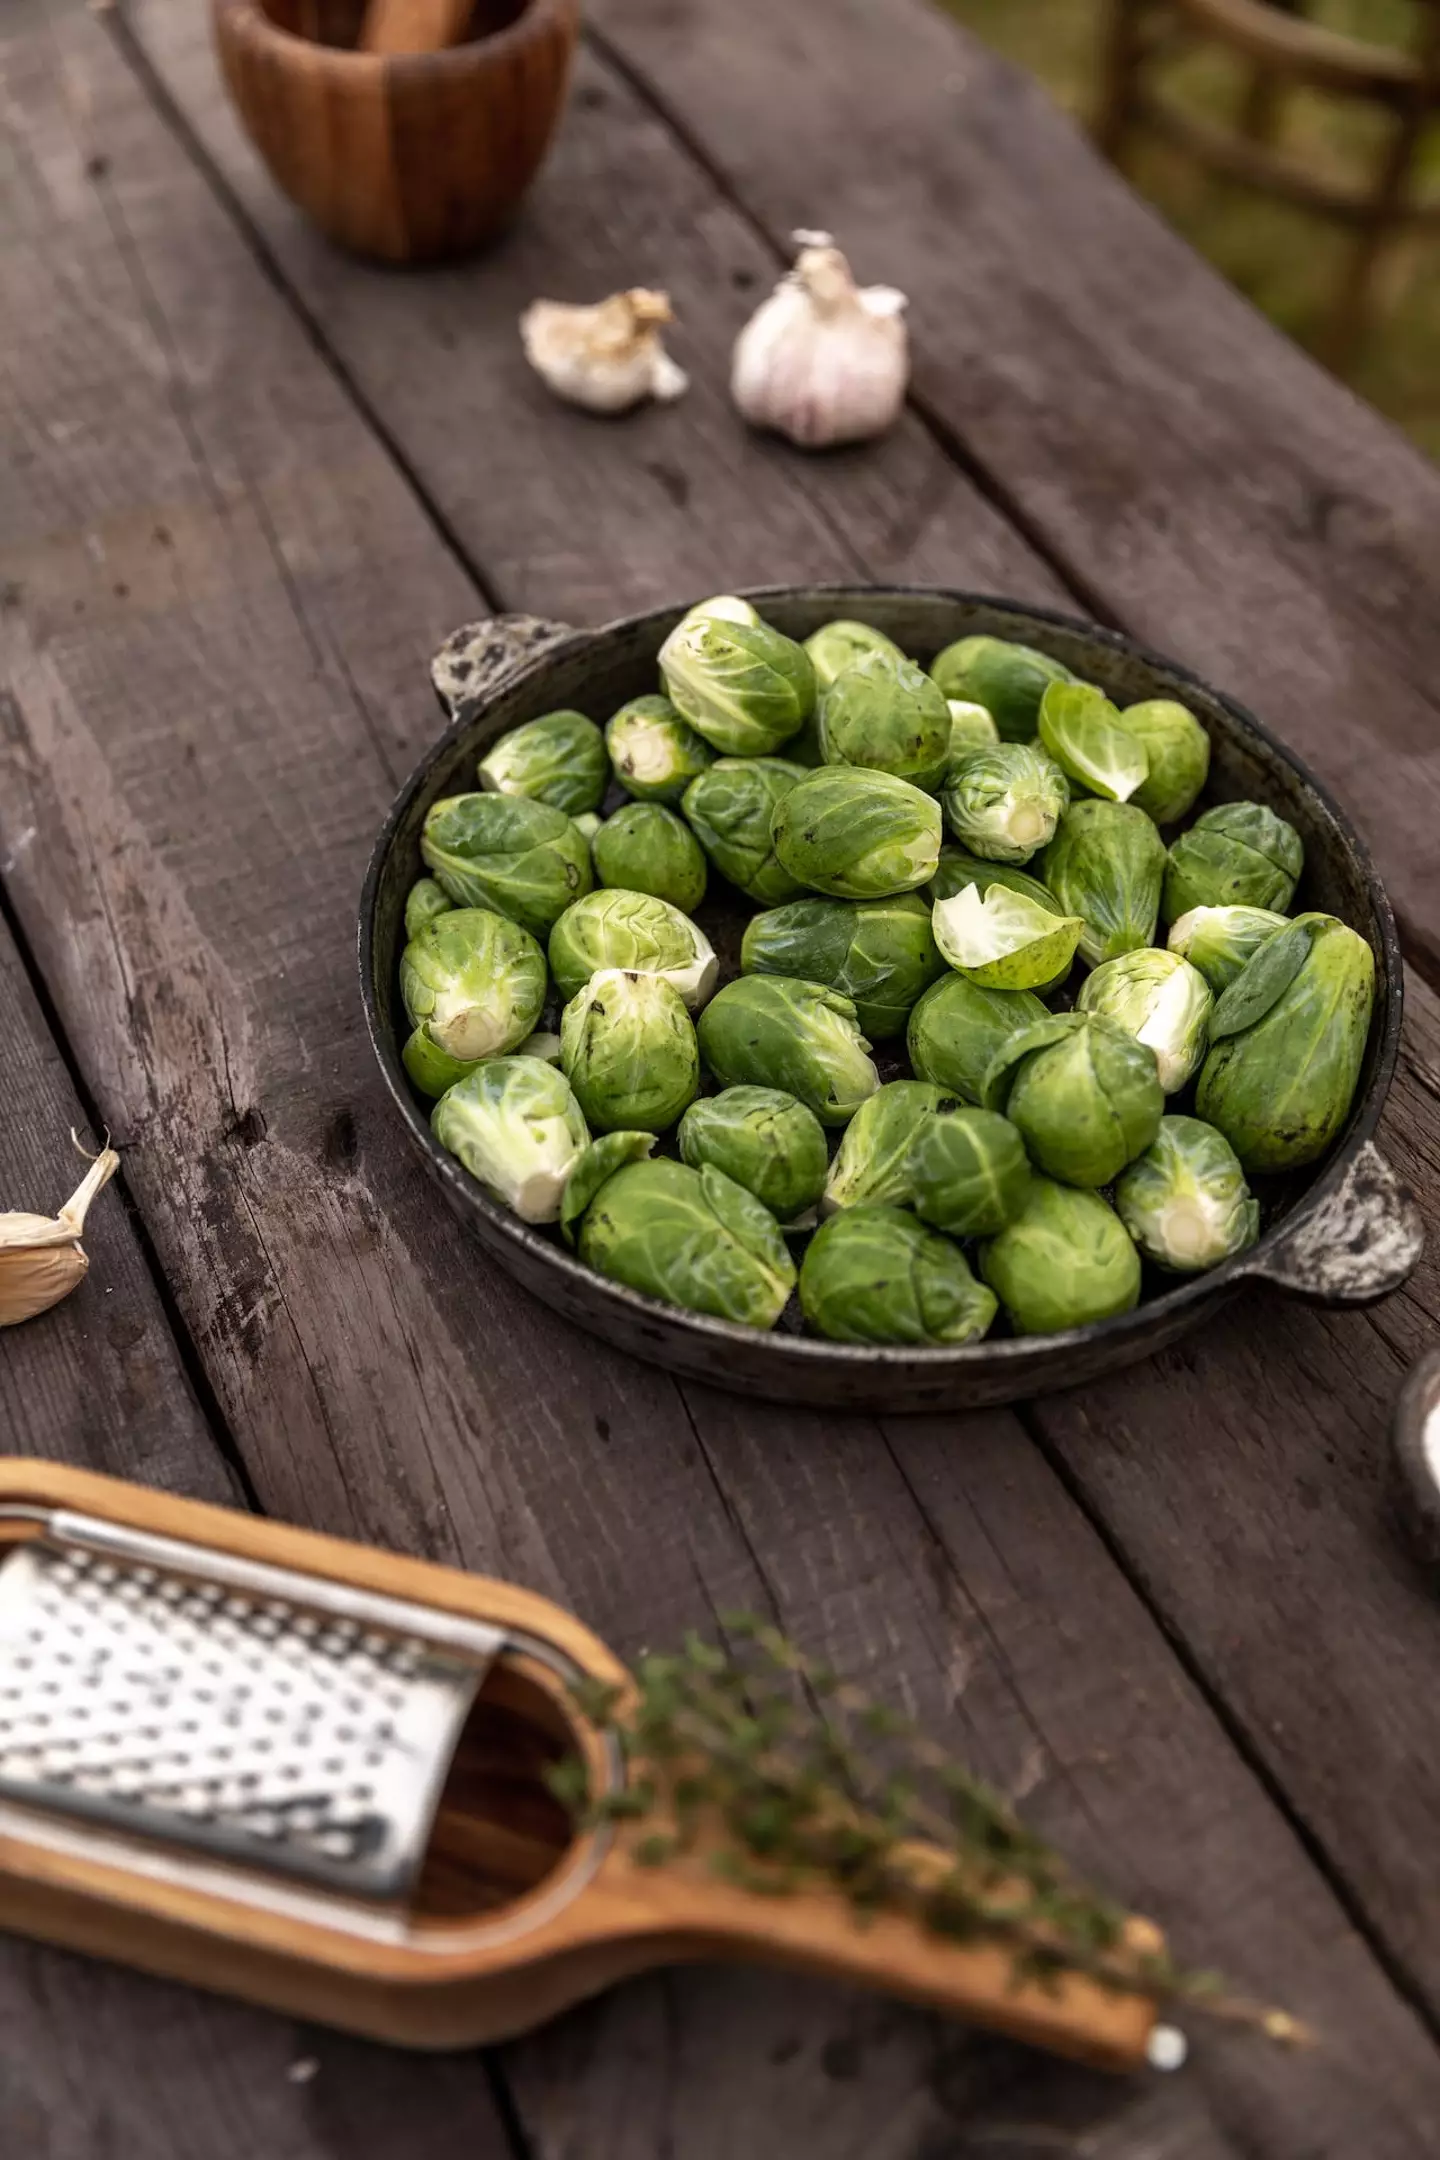 Christmas Brussel sprouts are probably the most controversial of all vegetables.